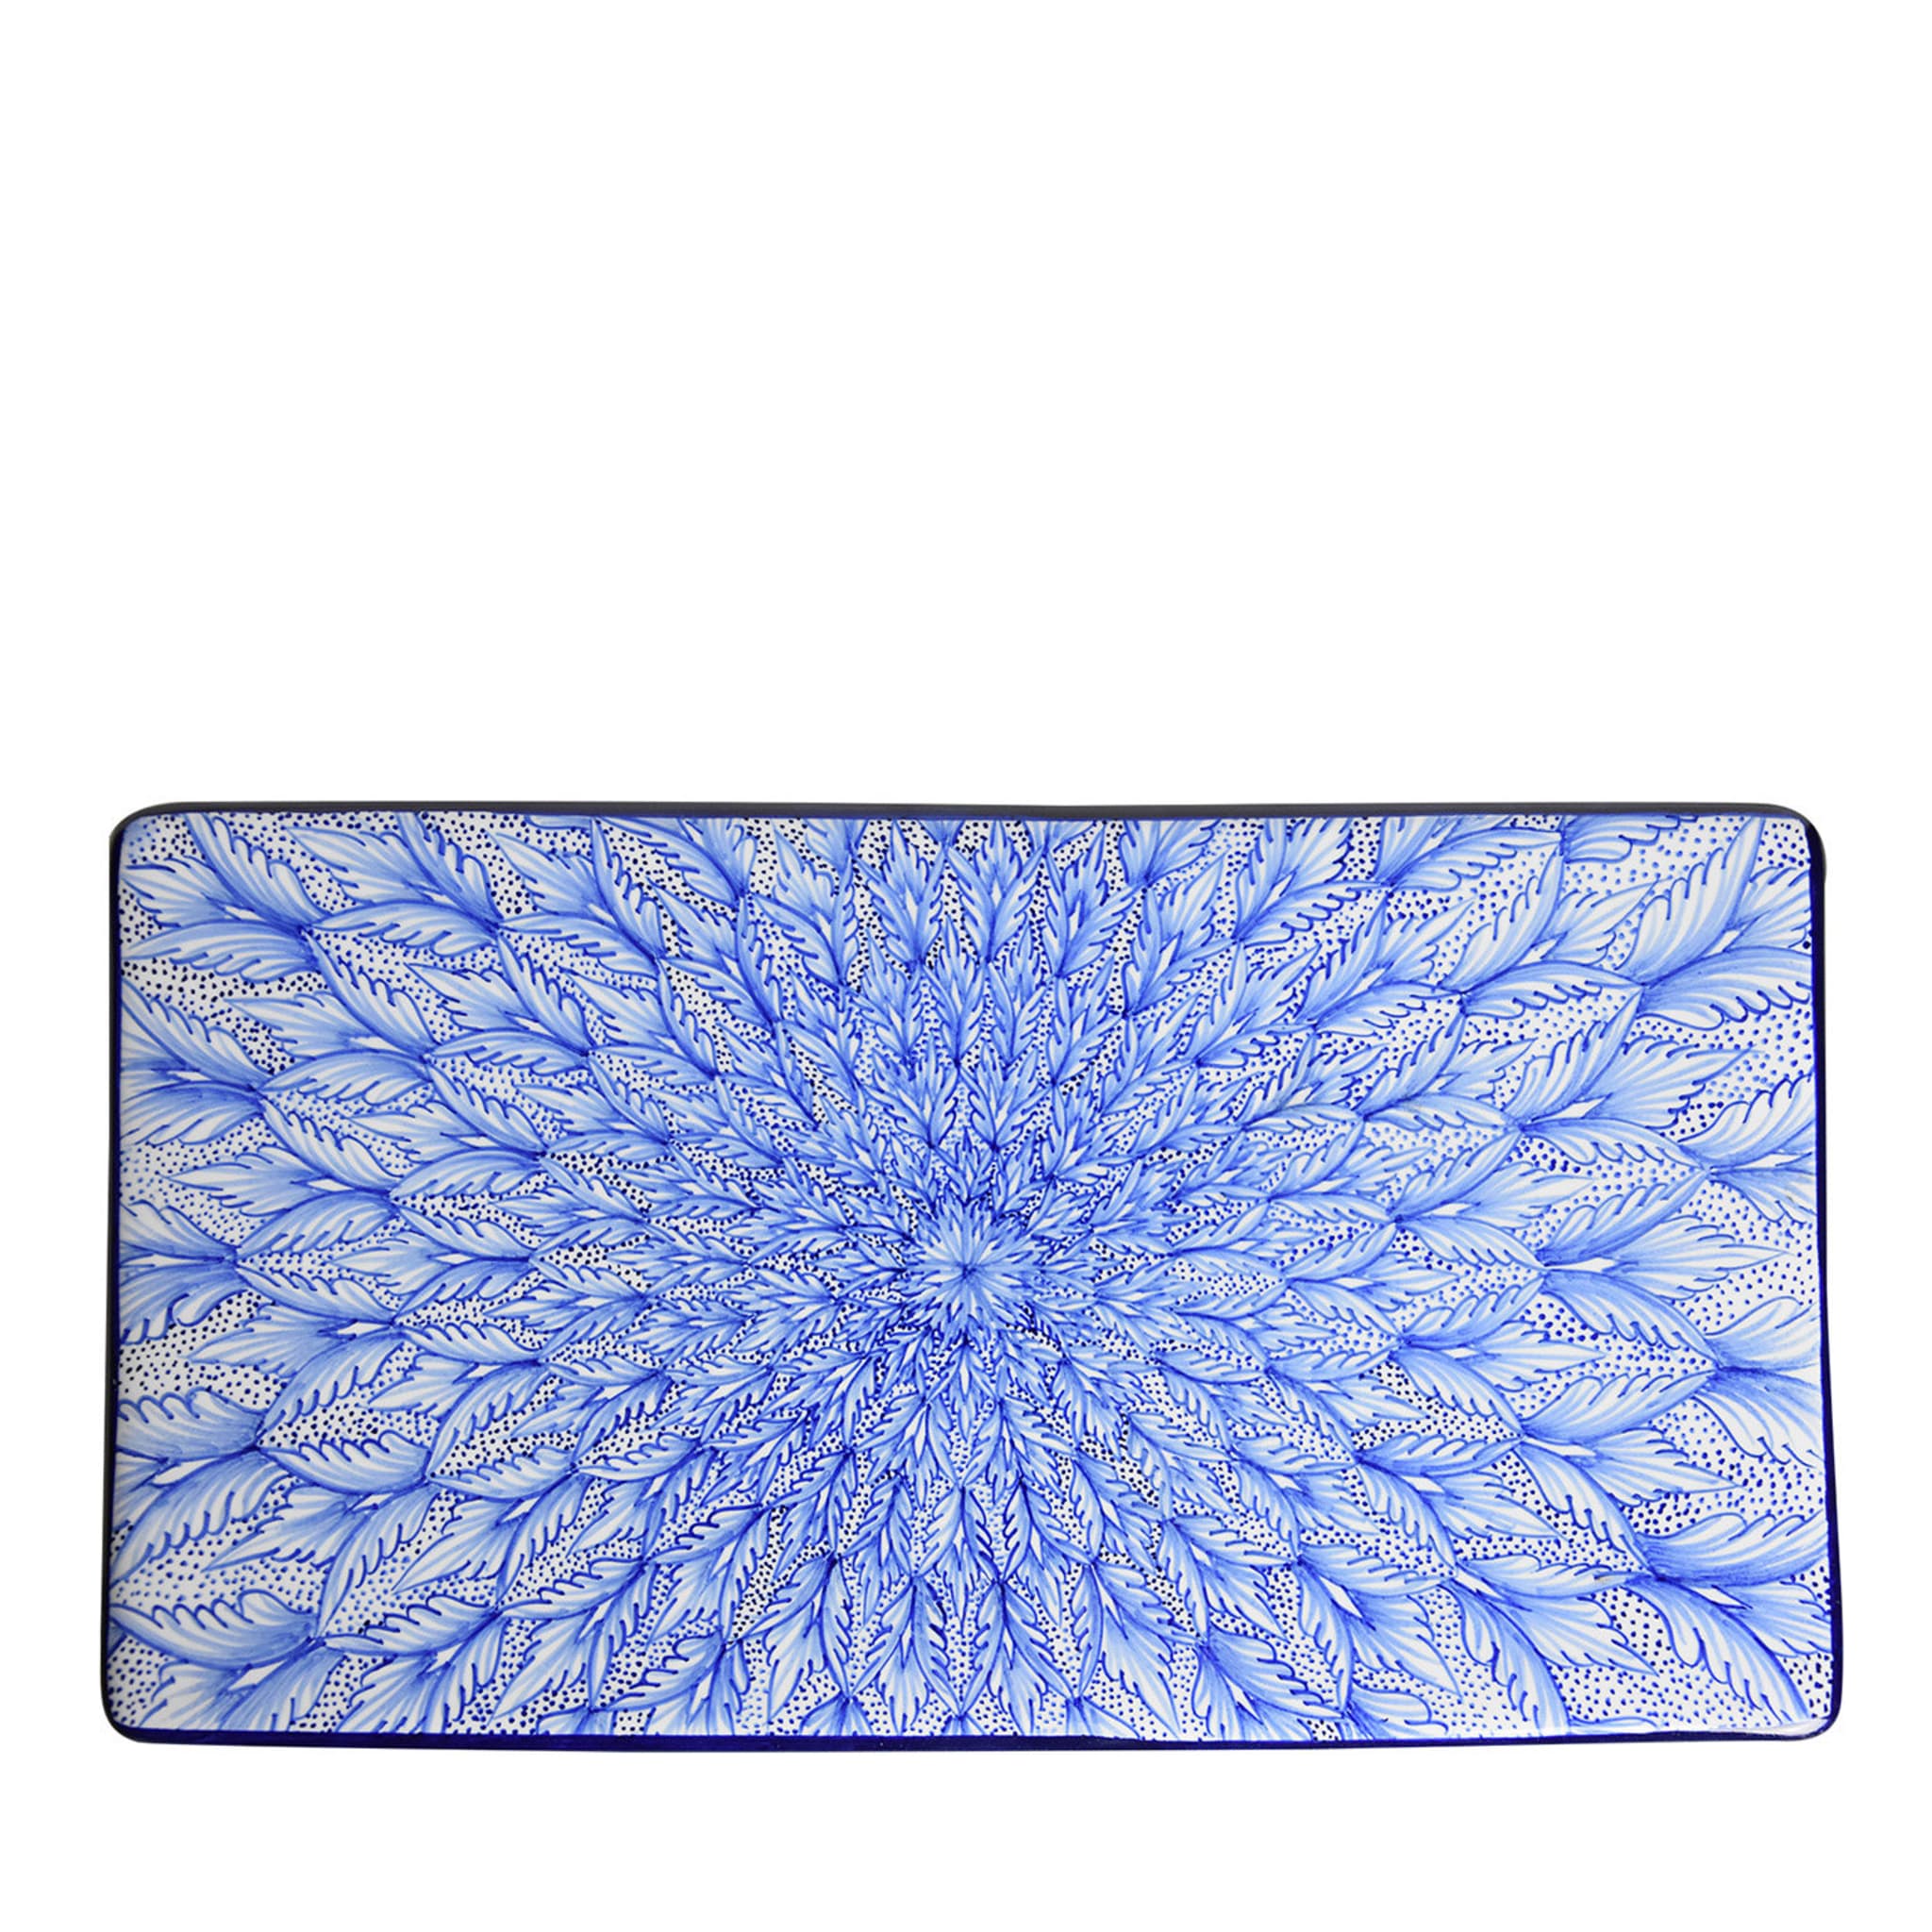 Peacock Feathers Rectangular Tray  - Main view